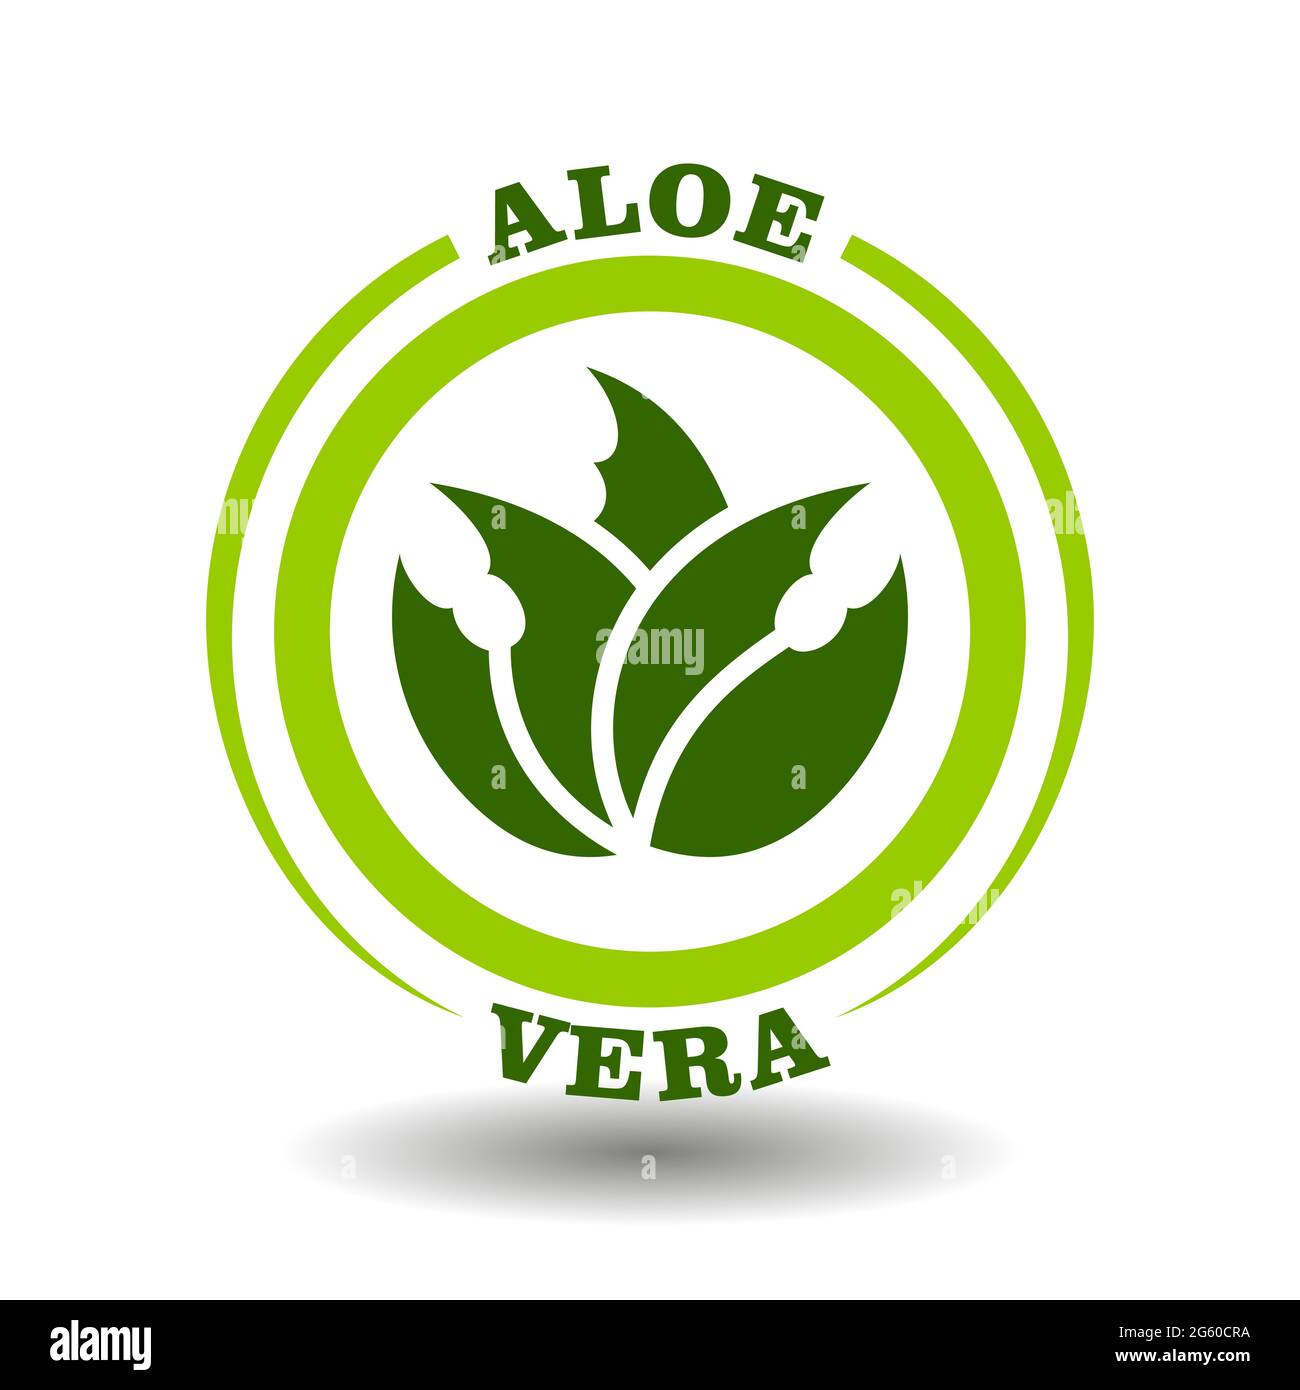 Circle logo Aloe vera with simple cactus leaves symbol in round vector icon. Natural cosmetics sign with bio organic extract, packaging pictogram of a Stock Vector